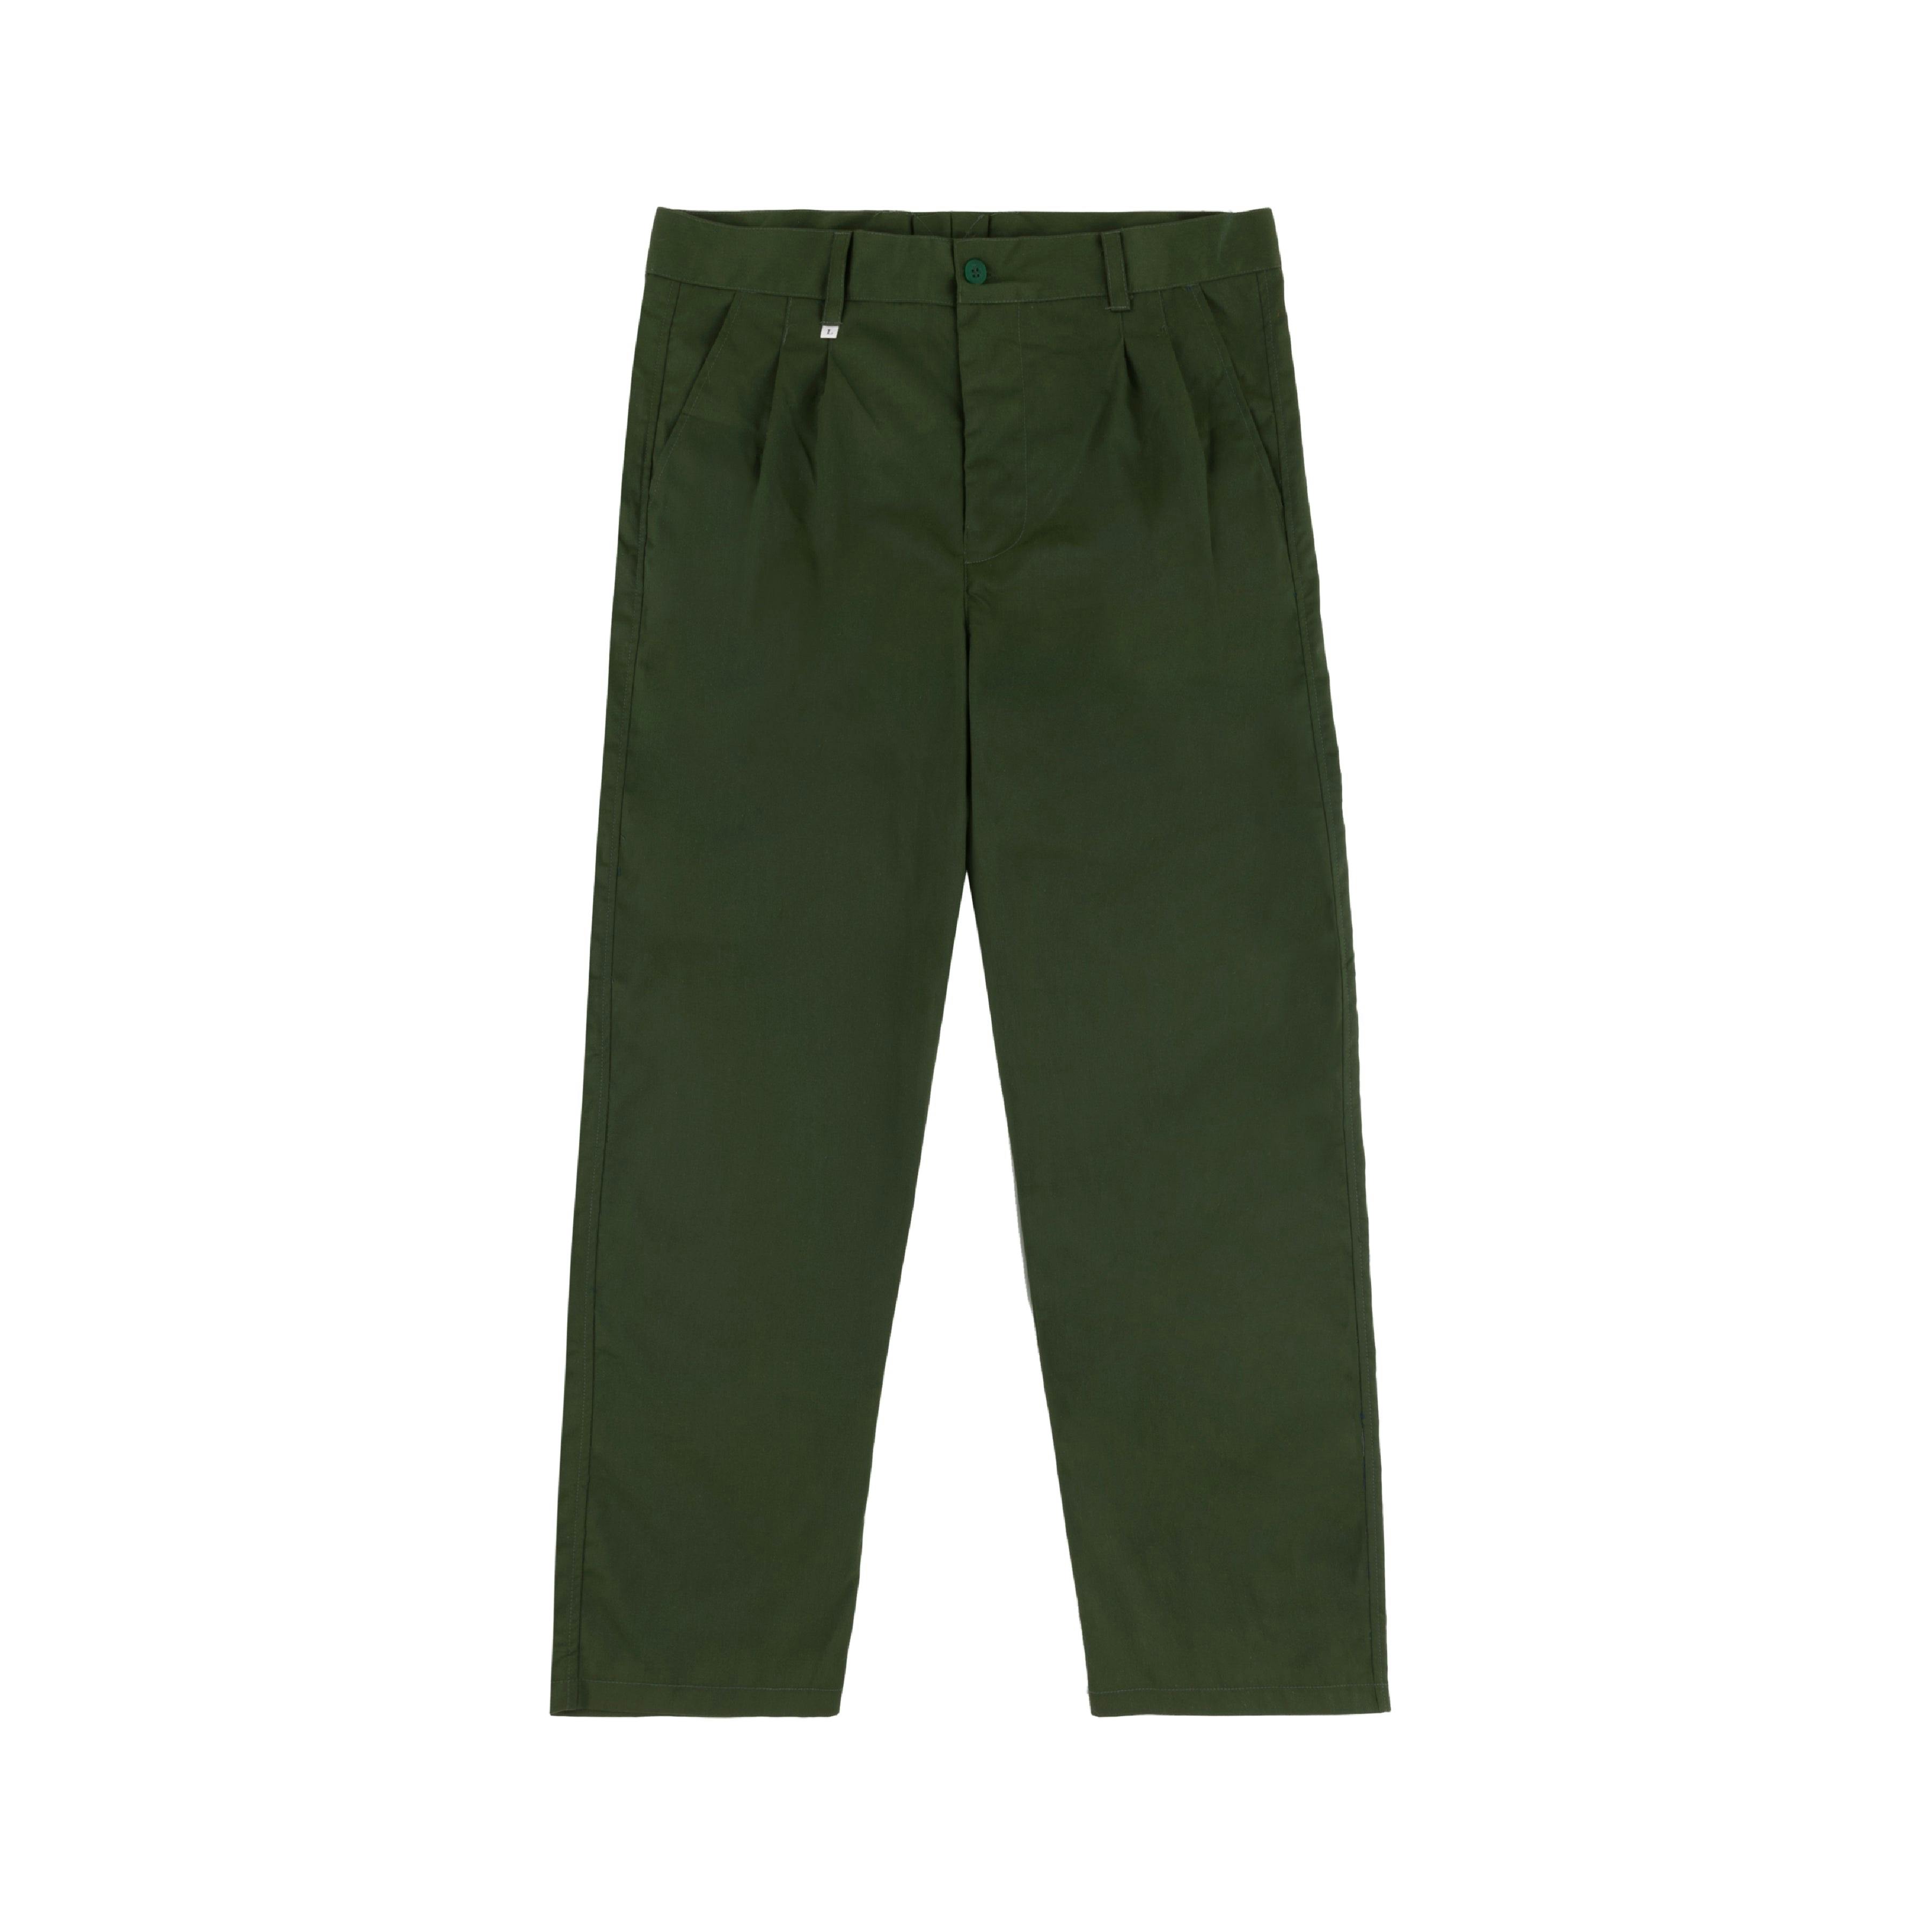 a green work pant = 1 of 5